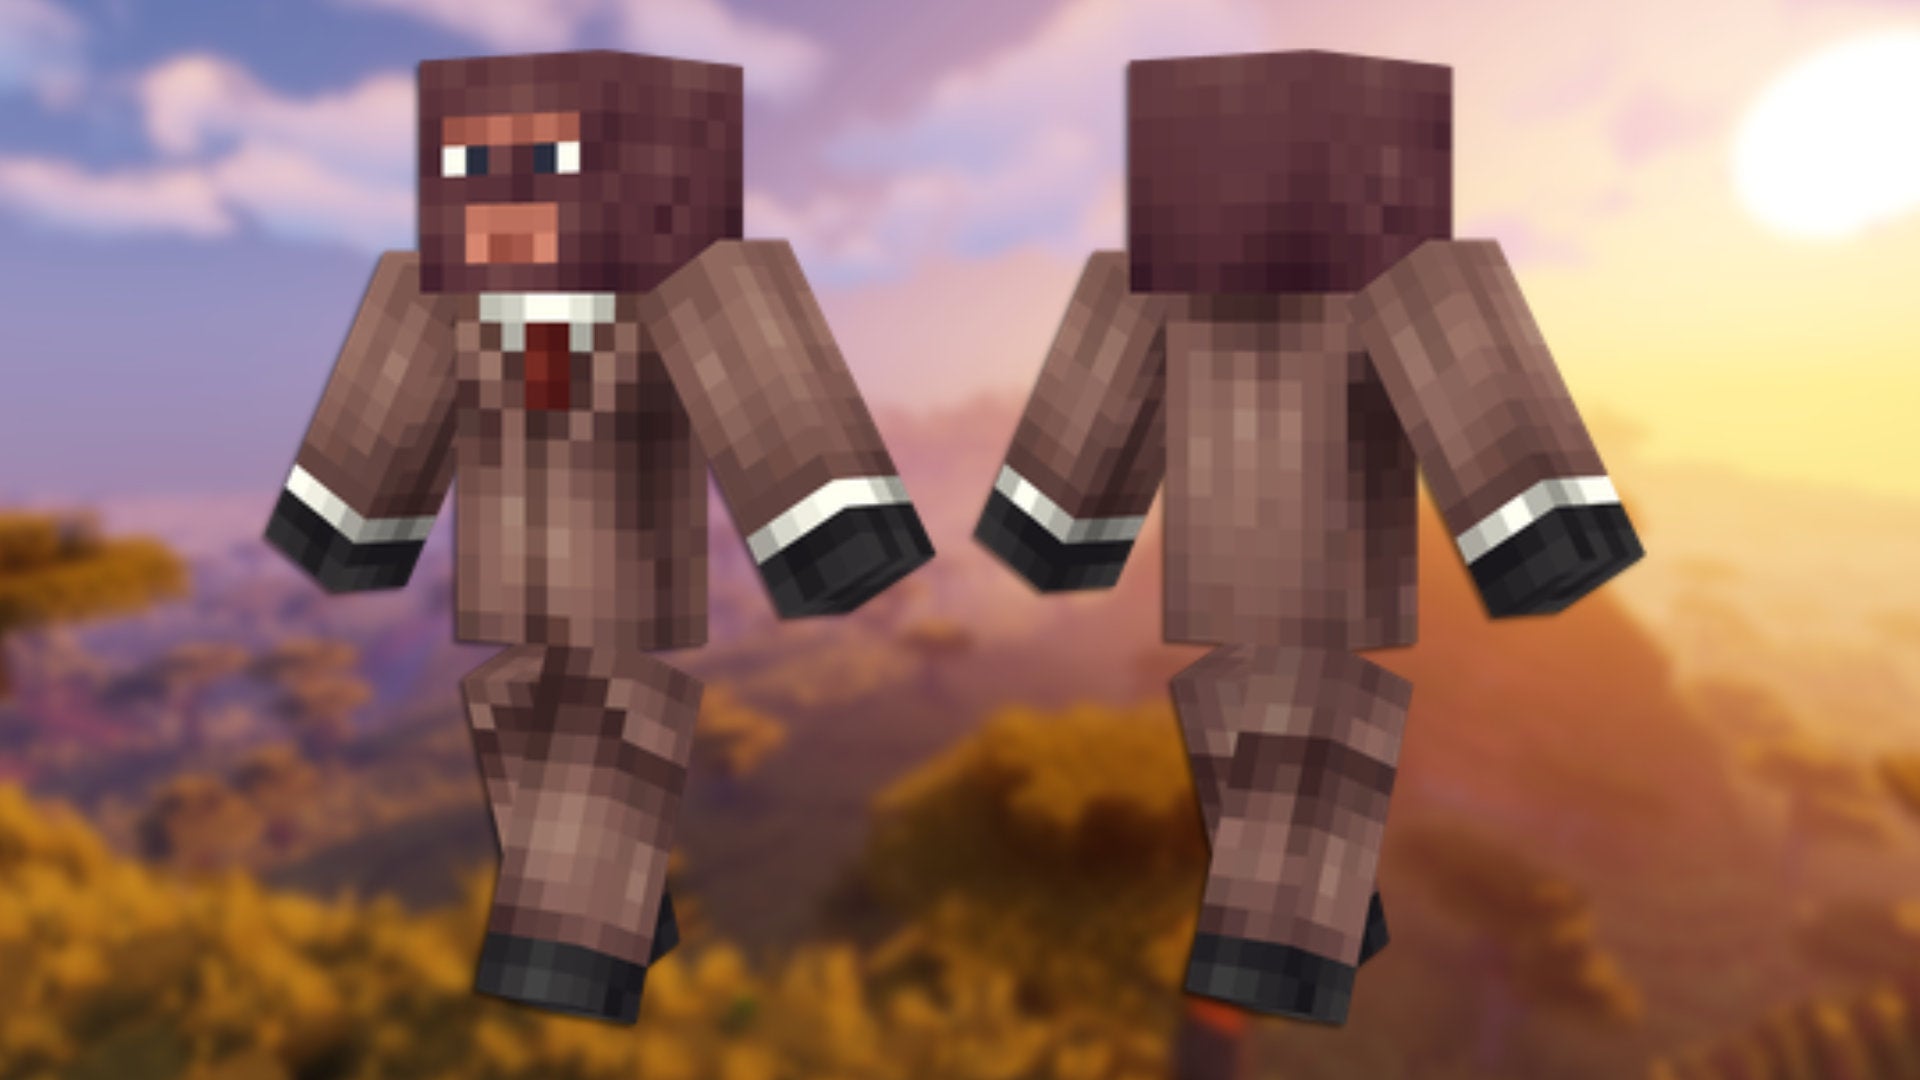 A front and back view of the TF2 Spy Minecraft skin.